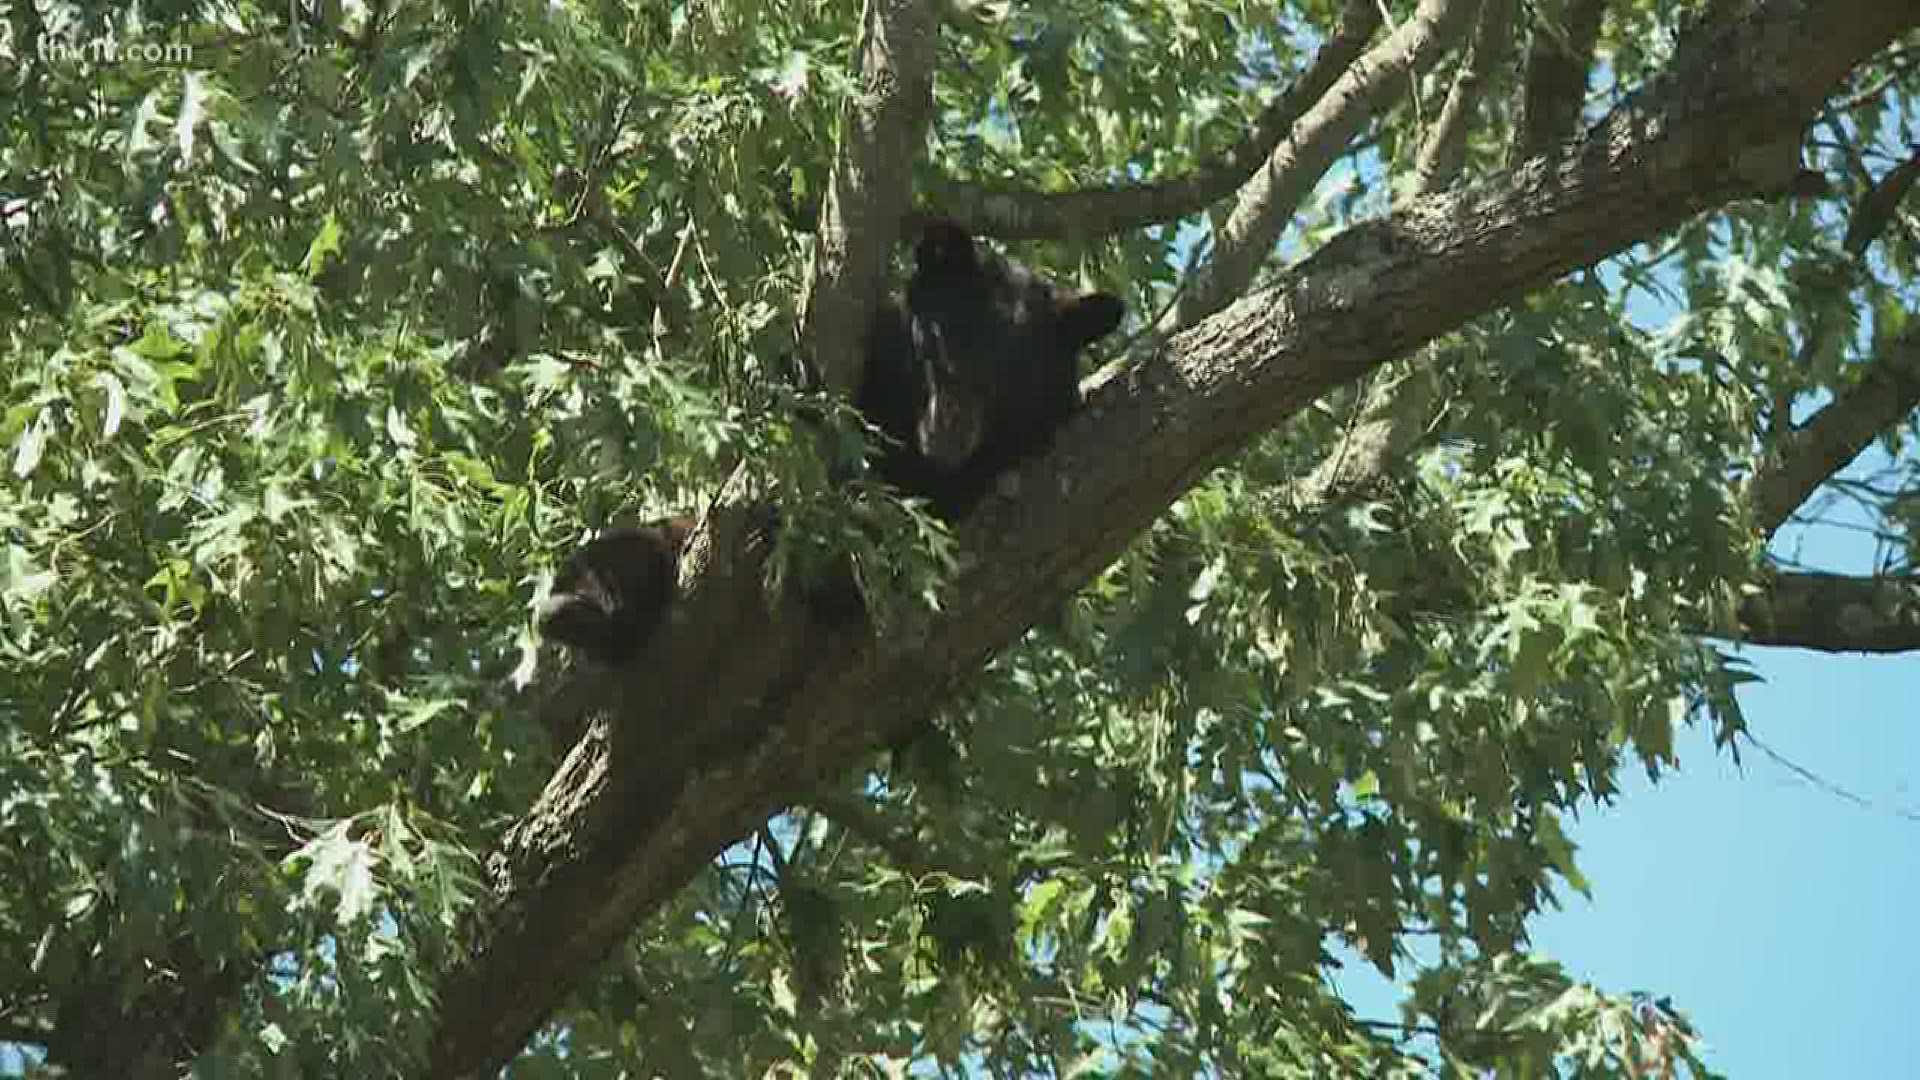 A bear has been hanging in a west Little Rock neighborhood tree all day.